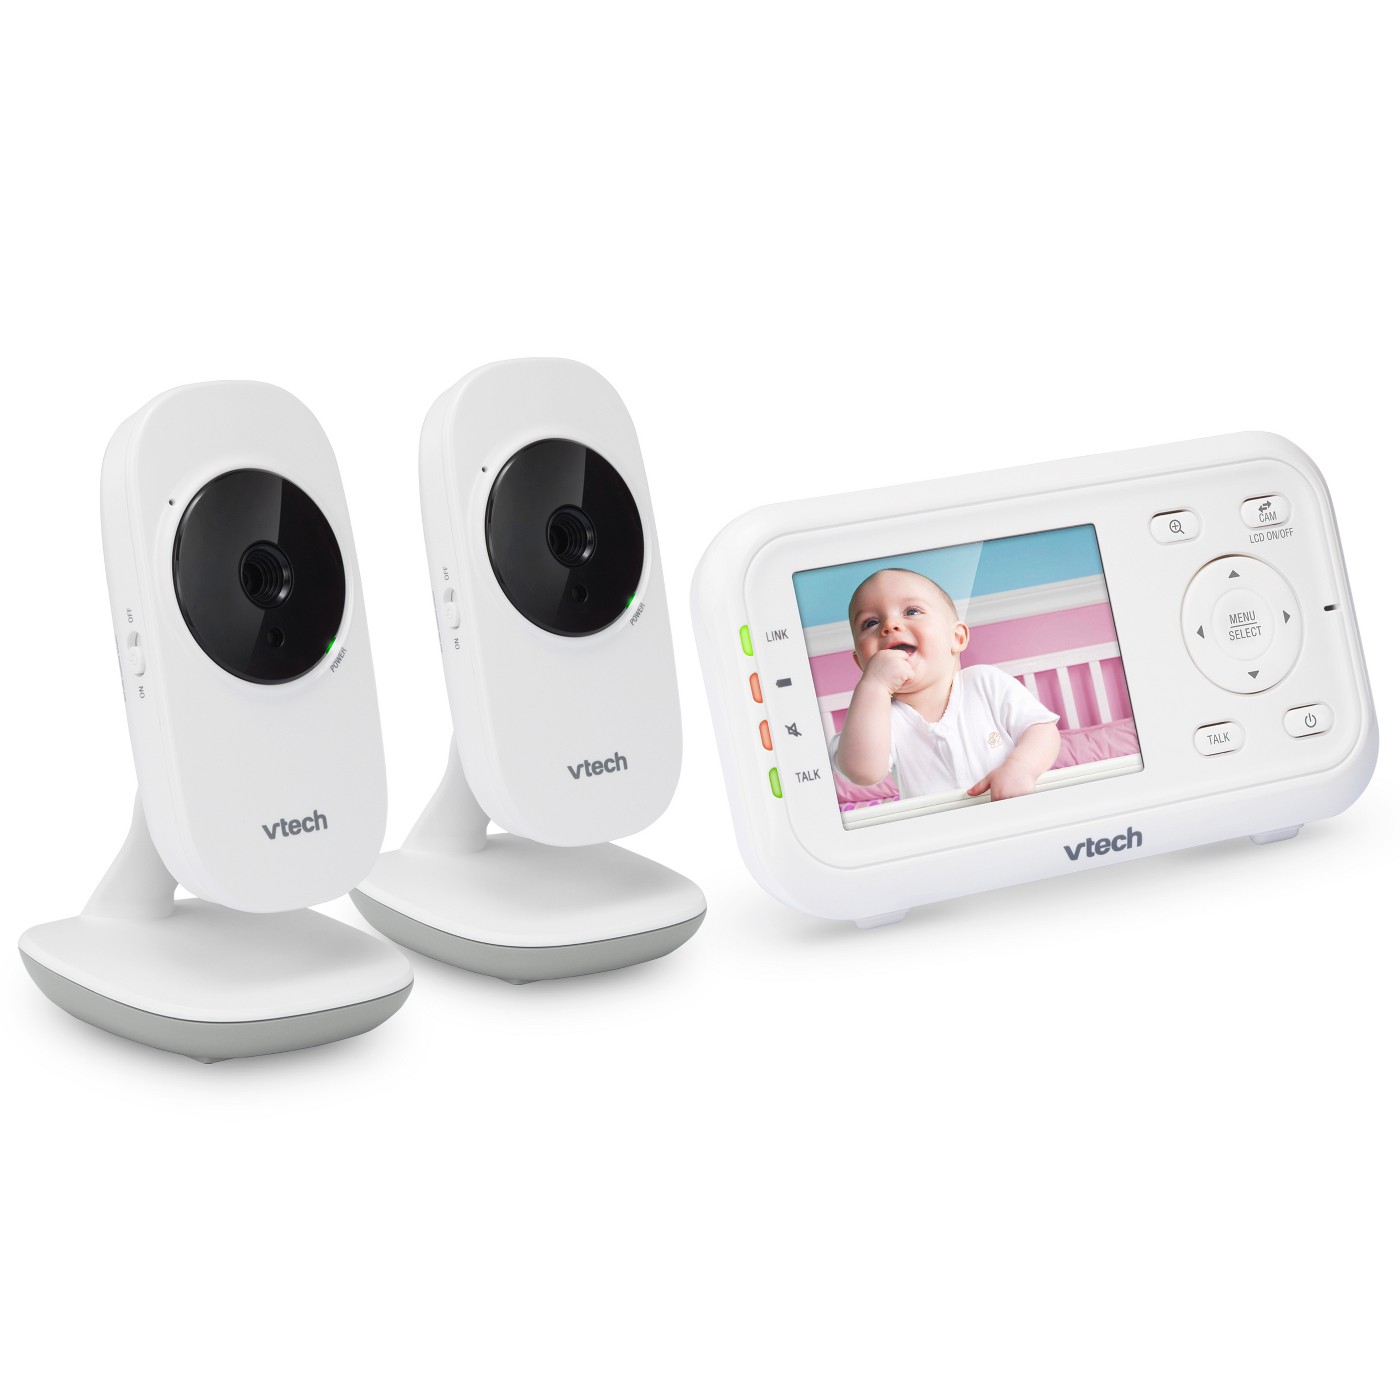 VTech VM3252-2 Video Baby Monitor with 2 Cameras 2.8" - image 1 of 3